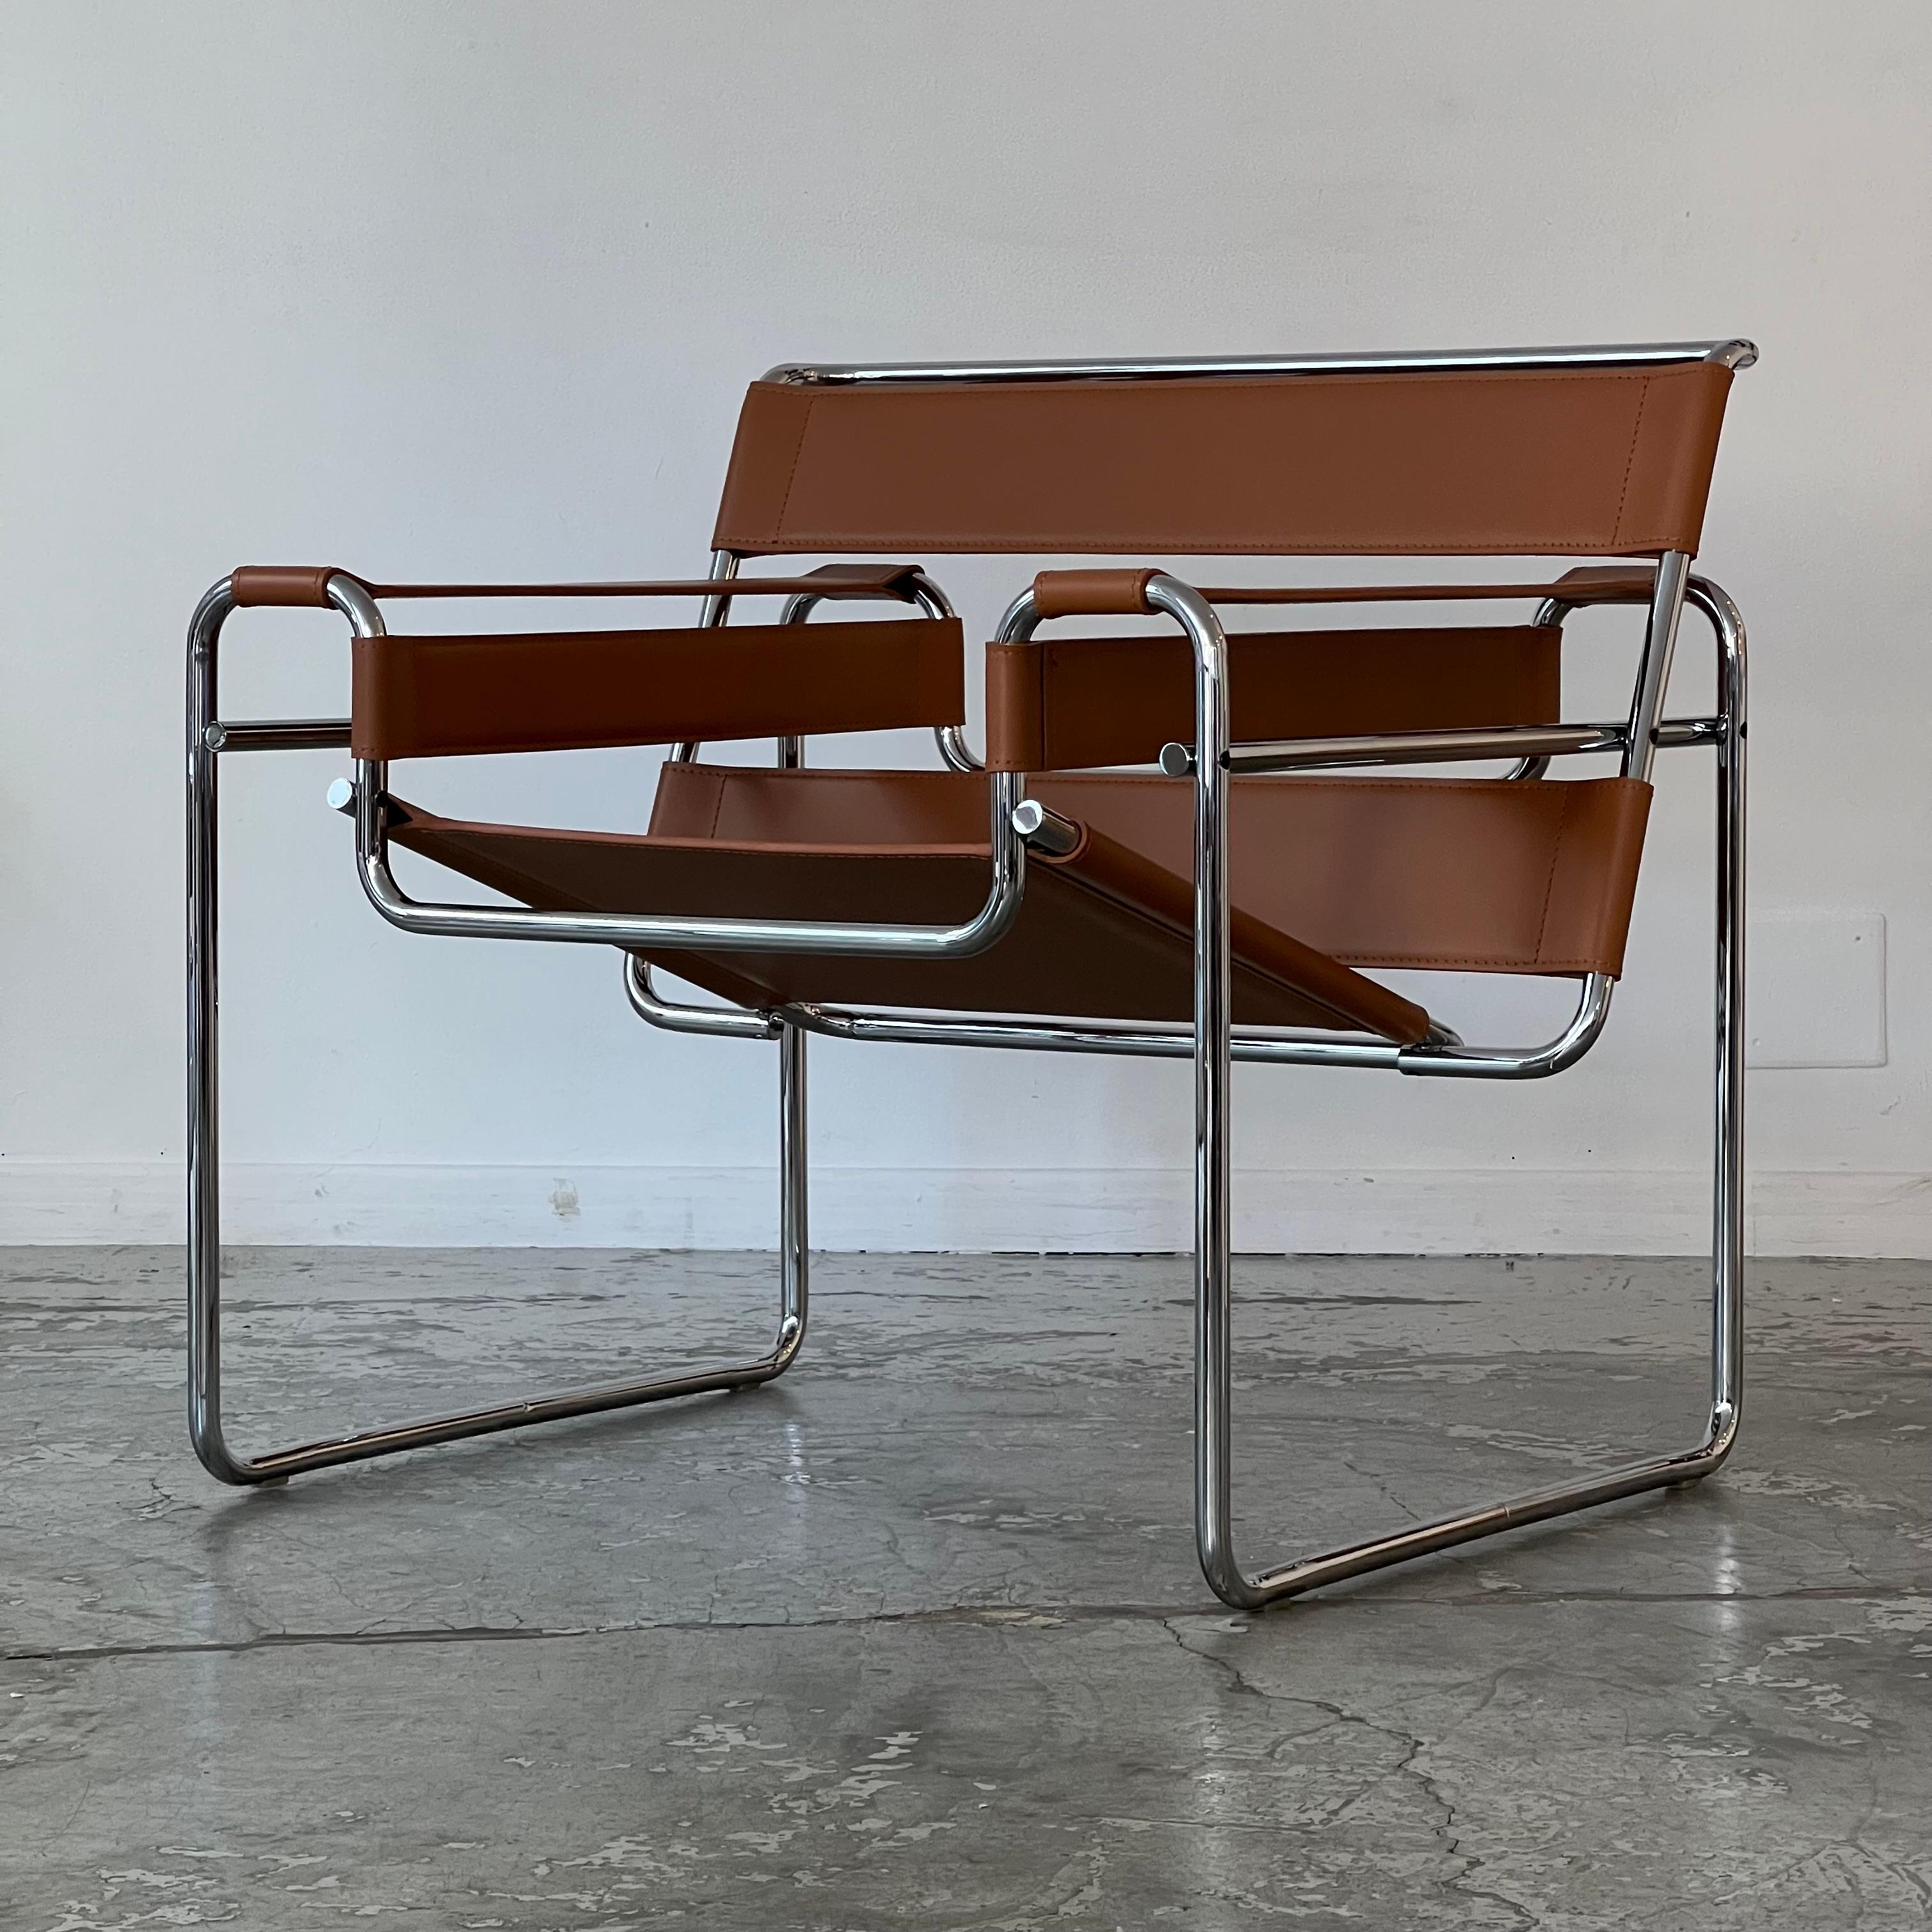 This iconic model was made by Marcel Breuer in 1925 during the period of time when he was The director of the Bauhaus carpentry workshop in Dessau in
Germany. For his creation, he was inspired by his Adler bike, fascinated by its design and the